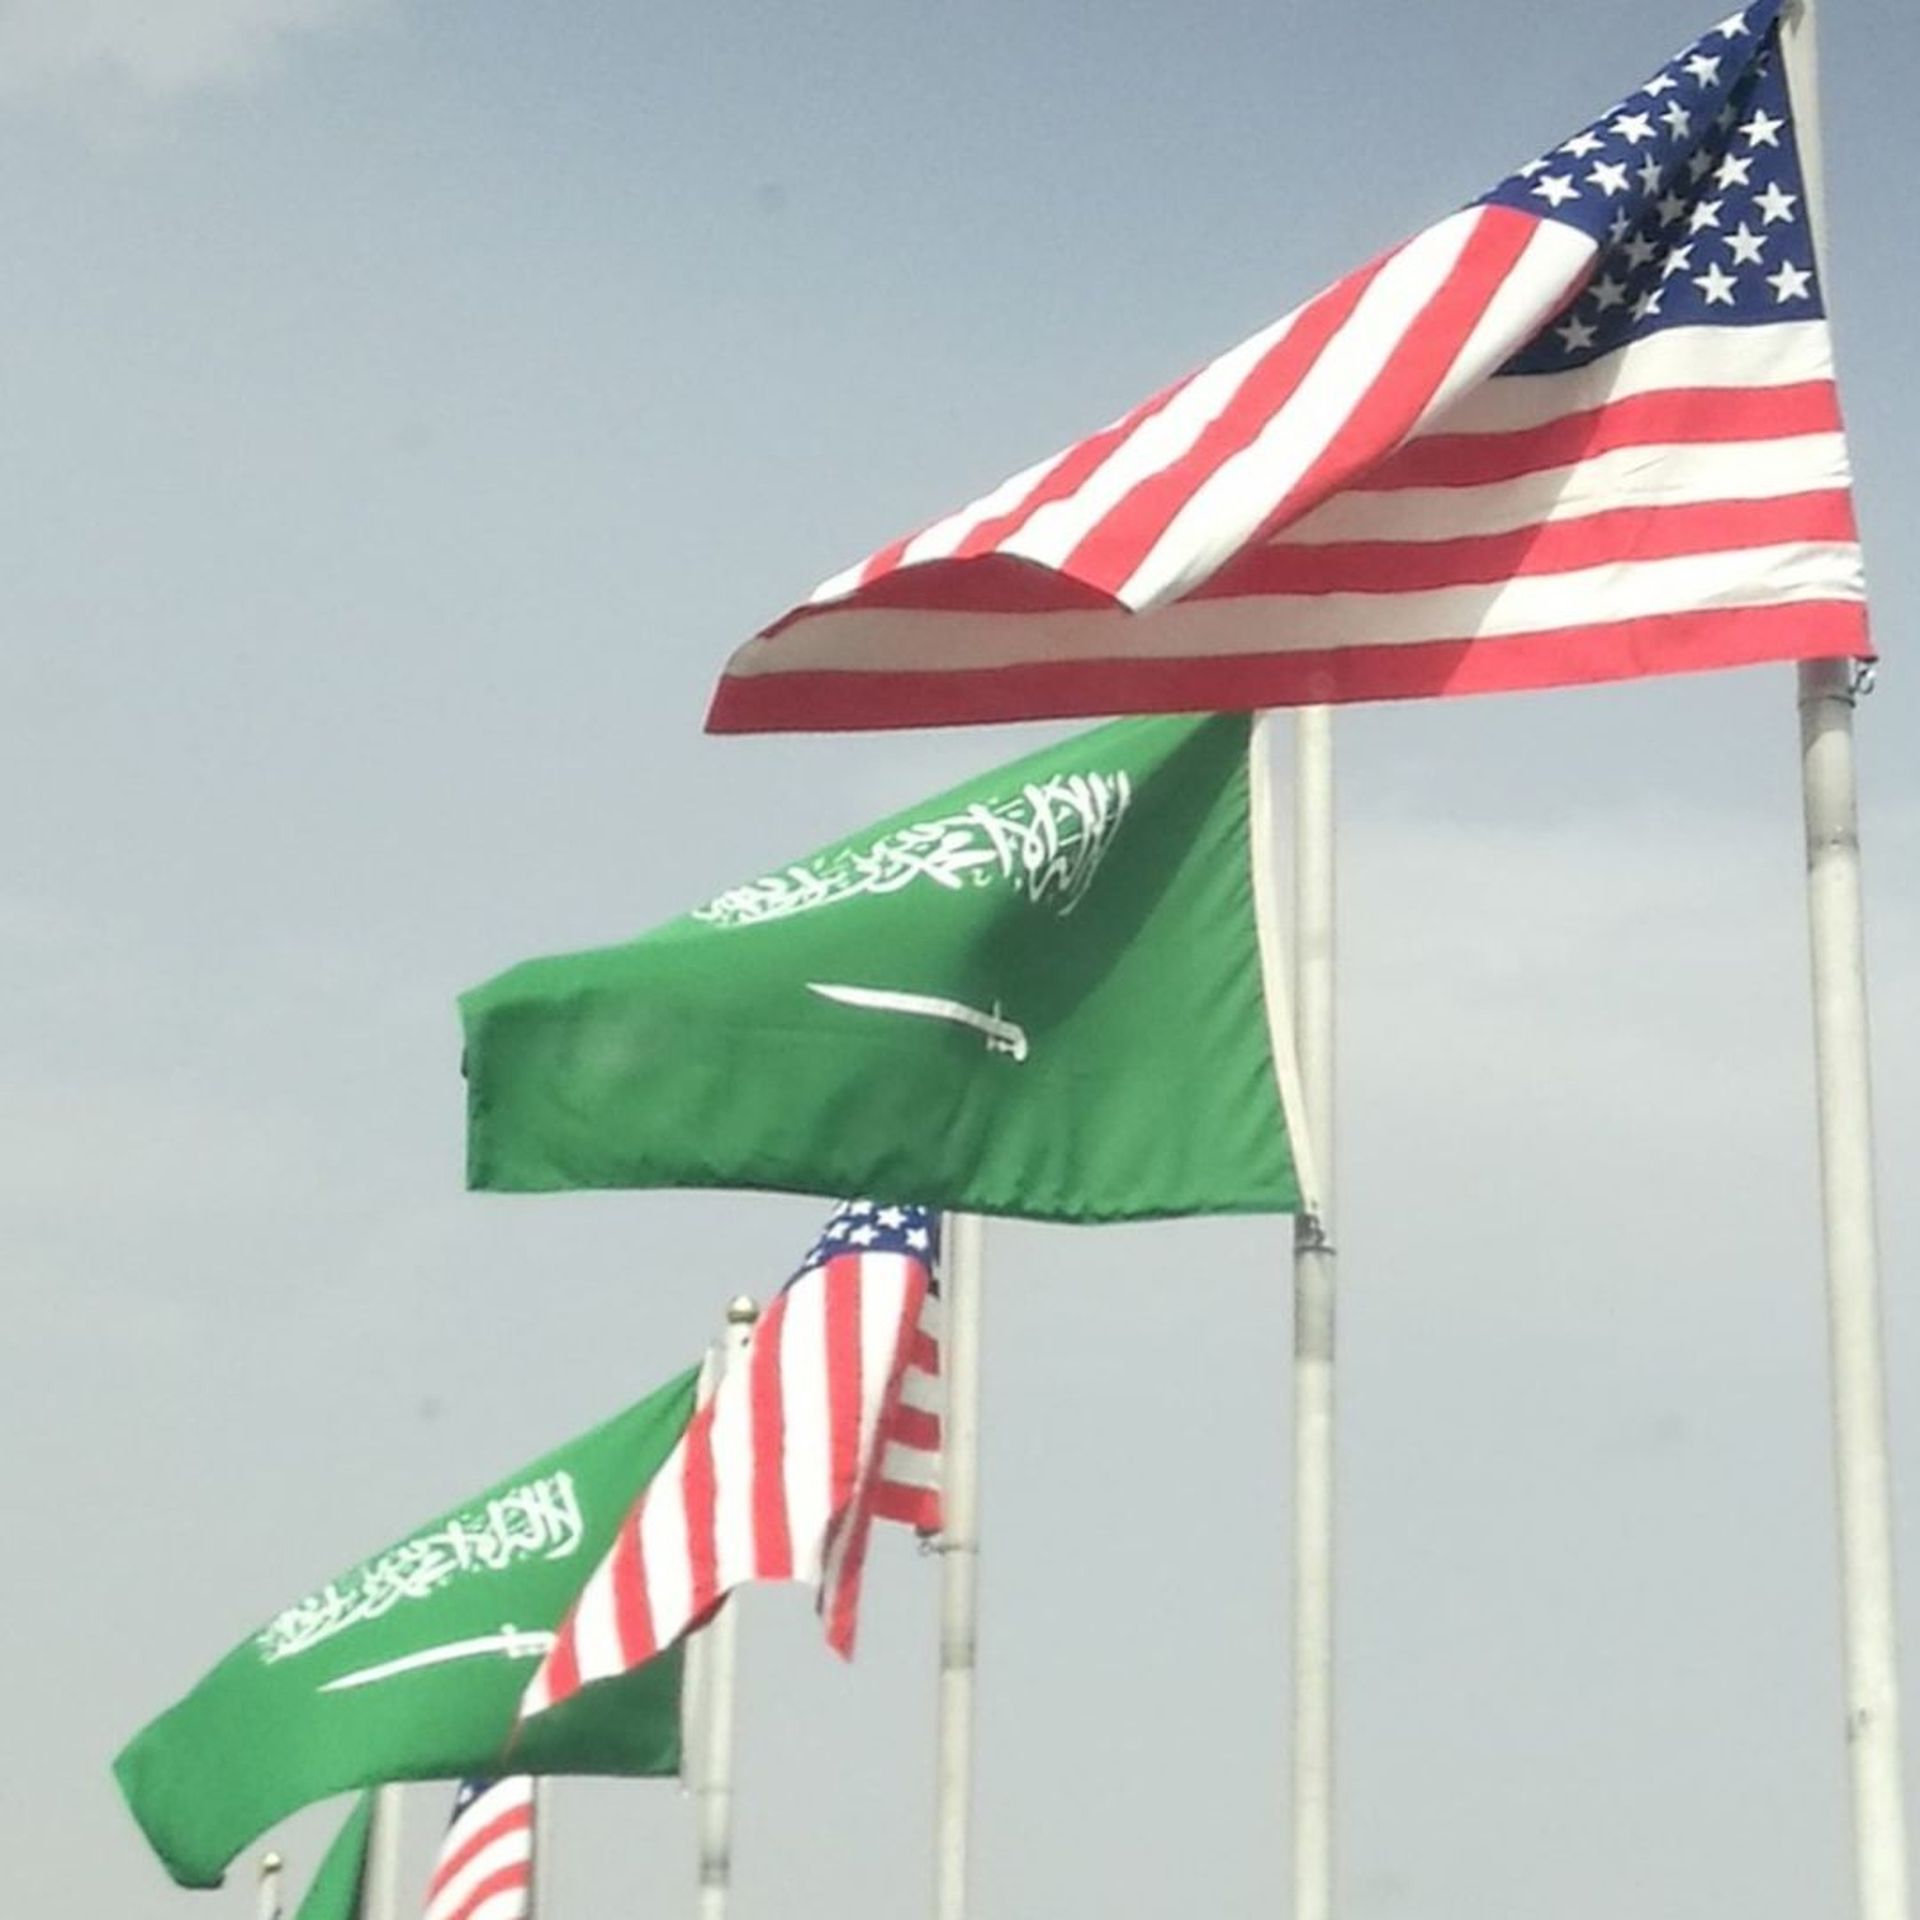 Flags of both United States and Saudi Arabia are raised in Riyadh on May 18, 2017. Photo: Ahmed Youssef Elsayed Abdelrehim/Anadolu Agency/Getty Images